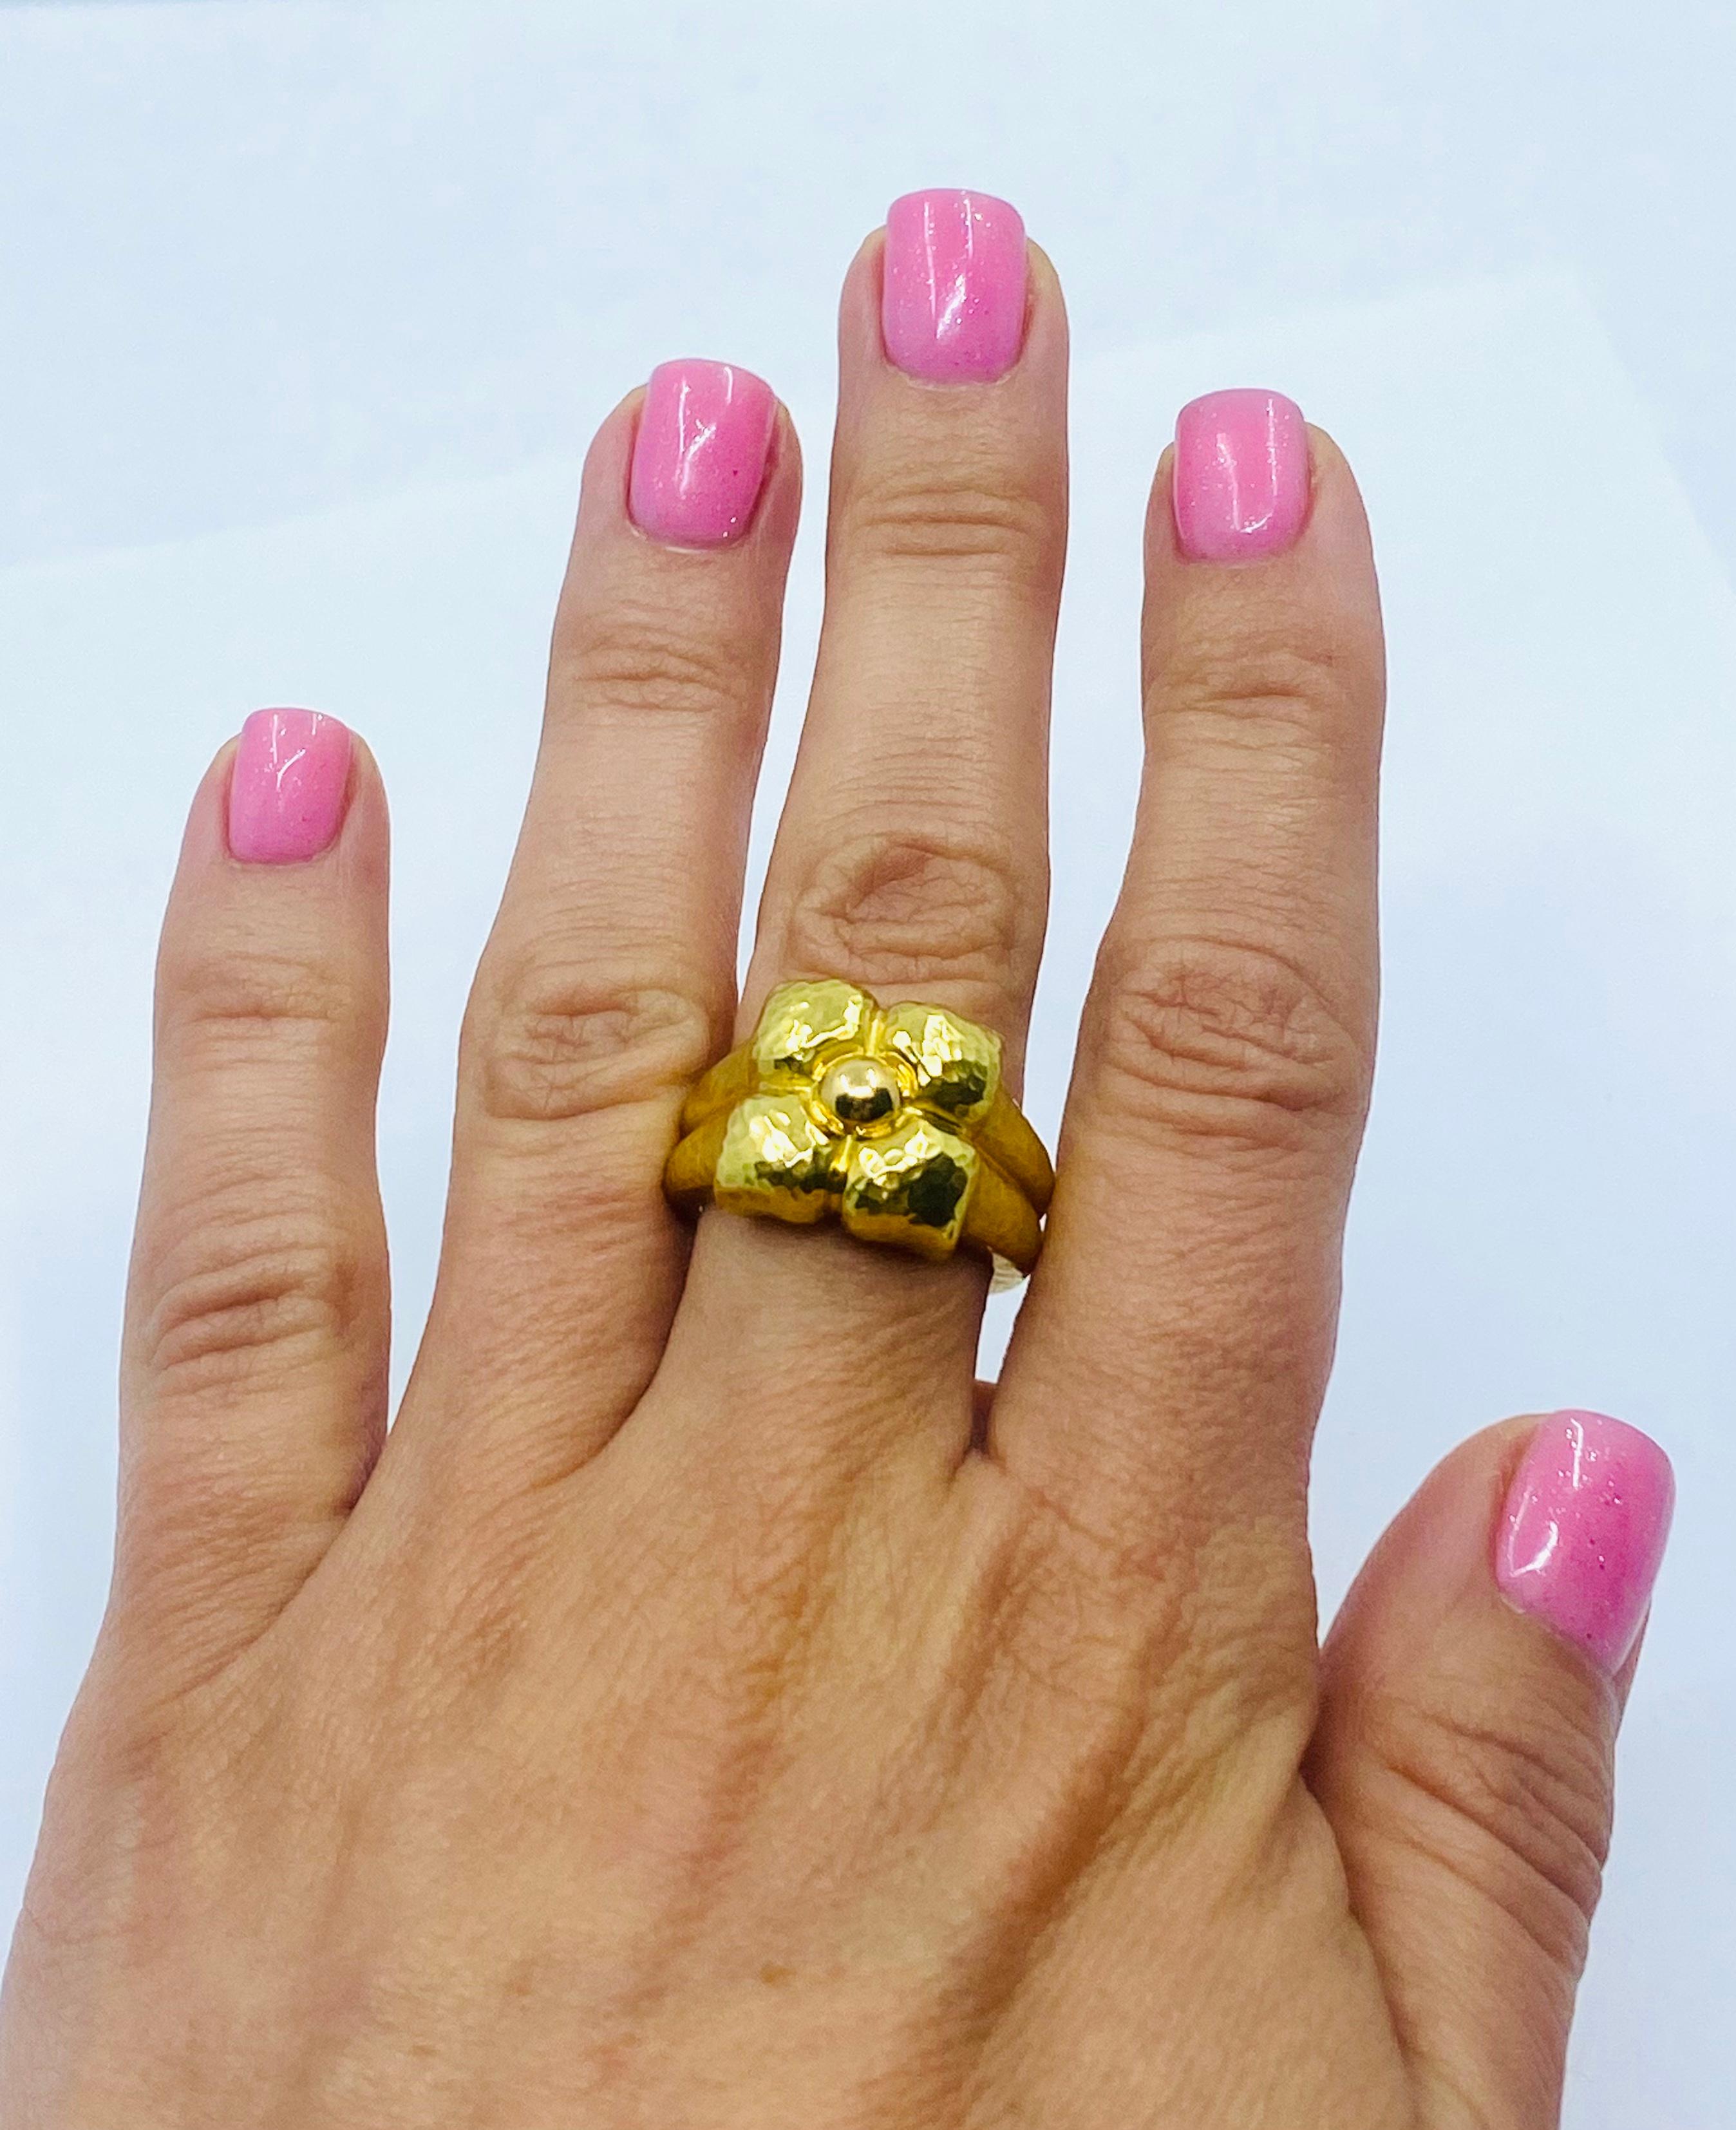 DESIGNER: Paloma Picasso for Tiffany & Co.
CIRCA: 1980s
MATERIALS: 18K Yellow Gold
WEIGHT: 12.6 grams
RING SIZE: 7.5
HALLMARKS: Tiffany & Co., Paloma Picasso, Italy

ITEM DETAILS:
A beautiful vintage Paloma Picasso for Tiffany & Co. ring made of 18k